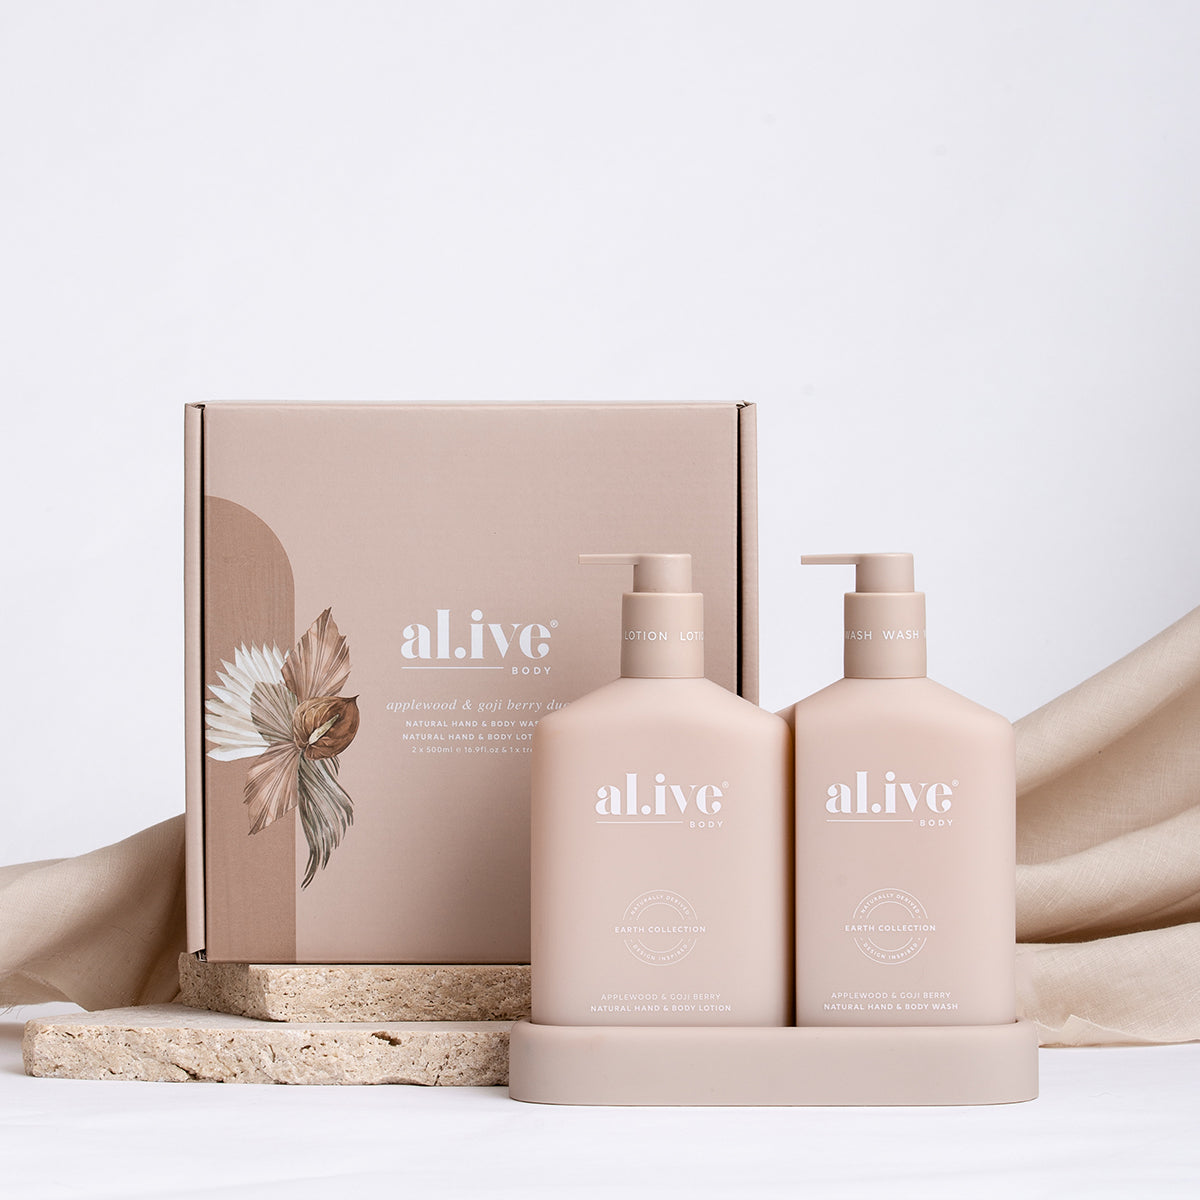 The al.ive body Applewood & Goji Berry Hand & Body Wash/Lotion Duo contains a luxurious blend of naturally derived ingredients, fortified with essential oils and native botanical extracts.  The Duo includes a 500ml hand & body wash, 500ml hand & body lotion and a matching tray.